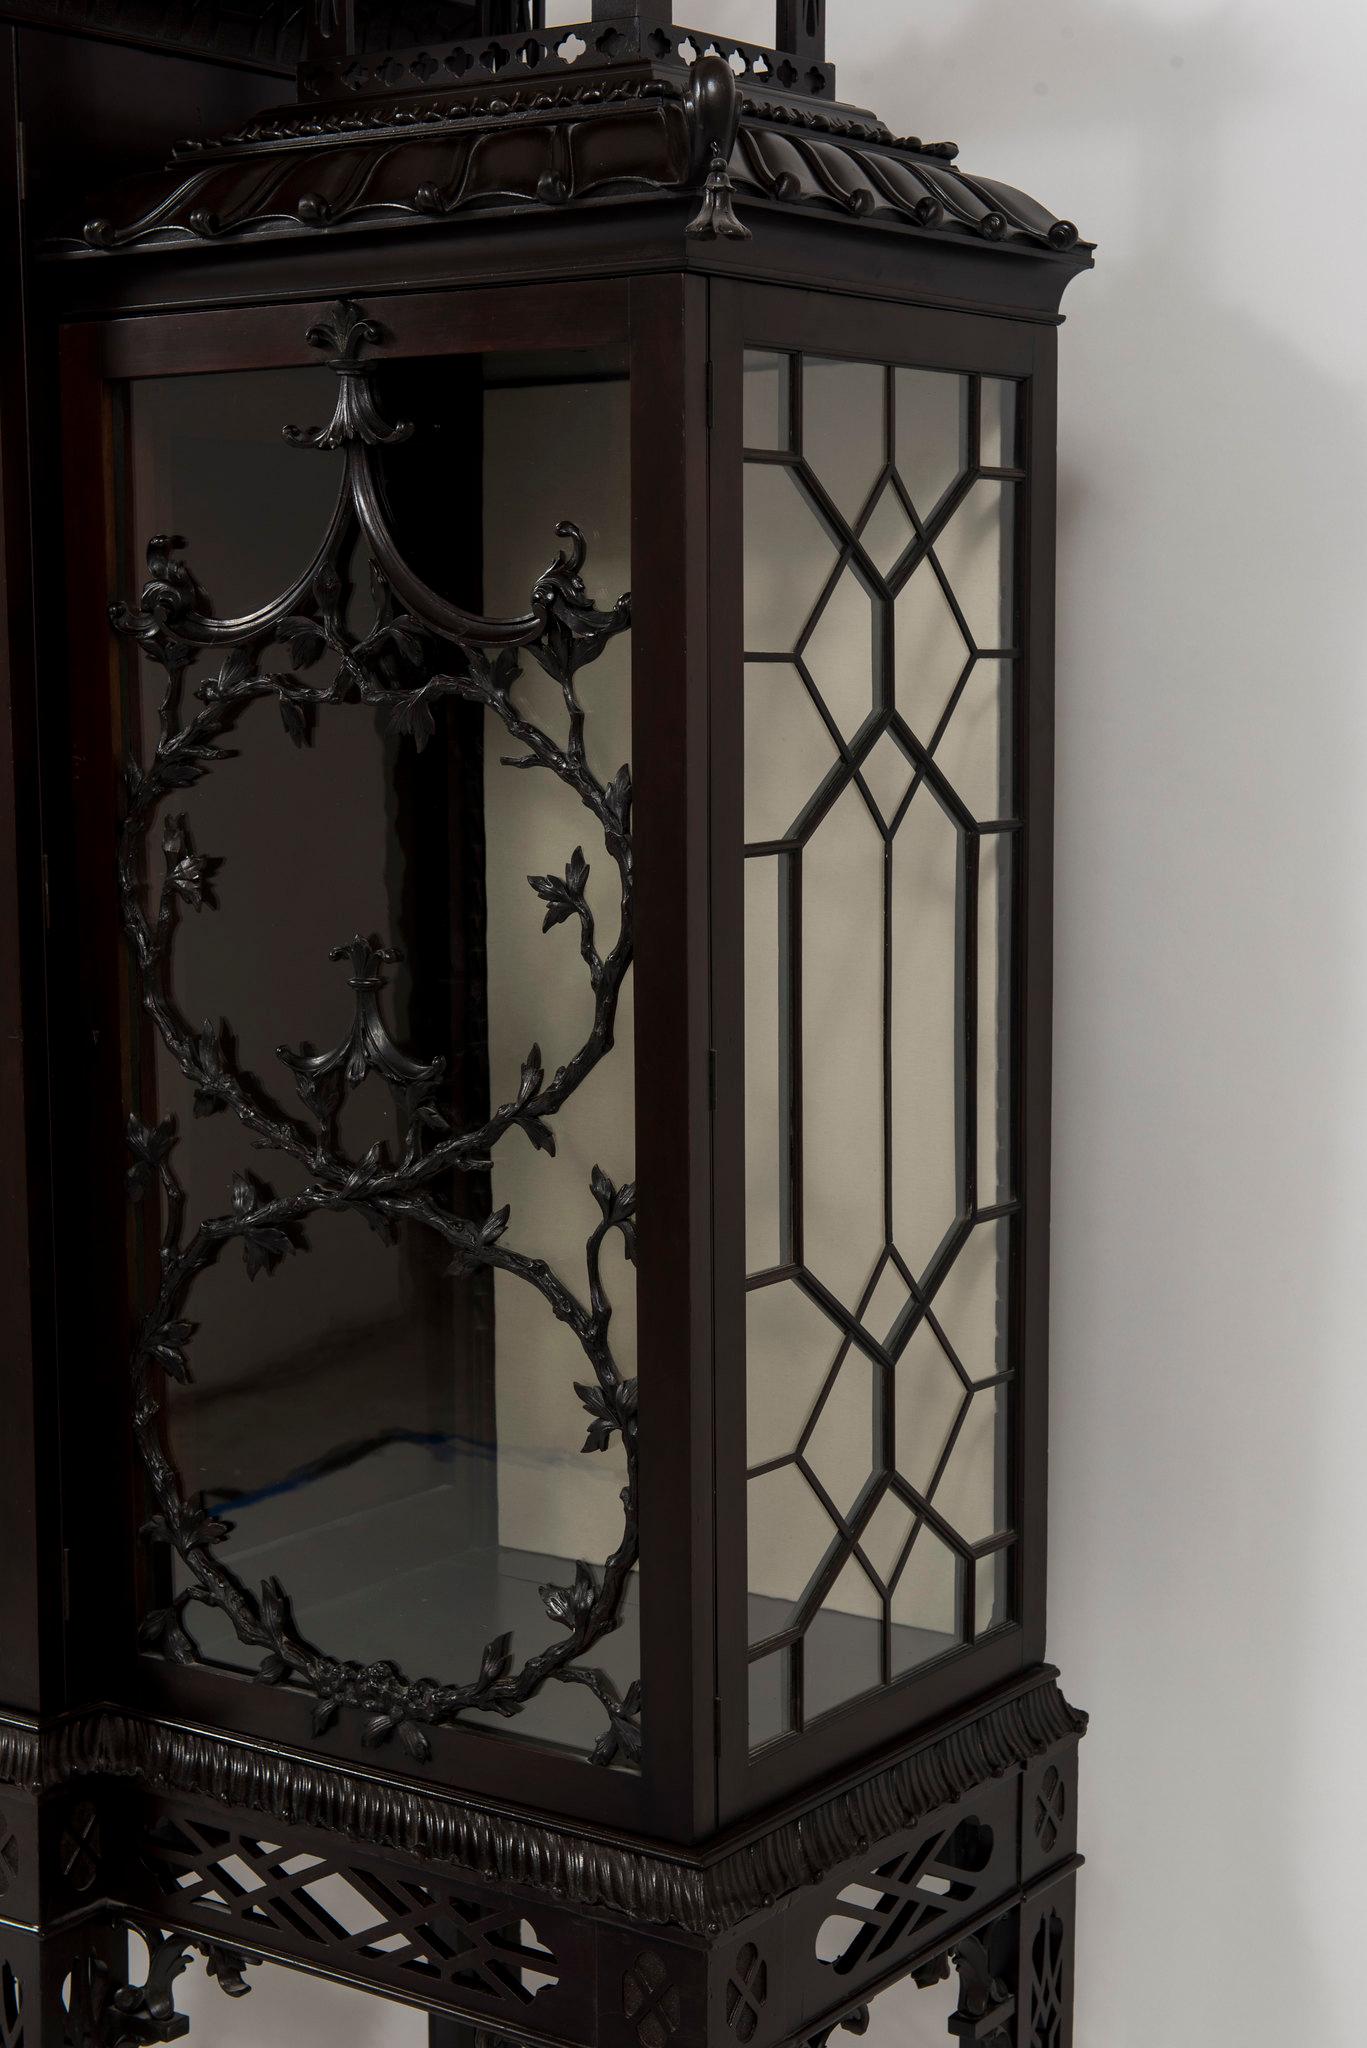 A stunning and rare 19th Century English Chinese Chippendale pagoda cabinets. This highly stylized hand carved mahogany cabinets features, glass shelving, pagoda gabled roofs, classic Chippendale fret work, and branch vined glazing bars in a trellis